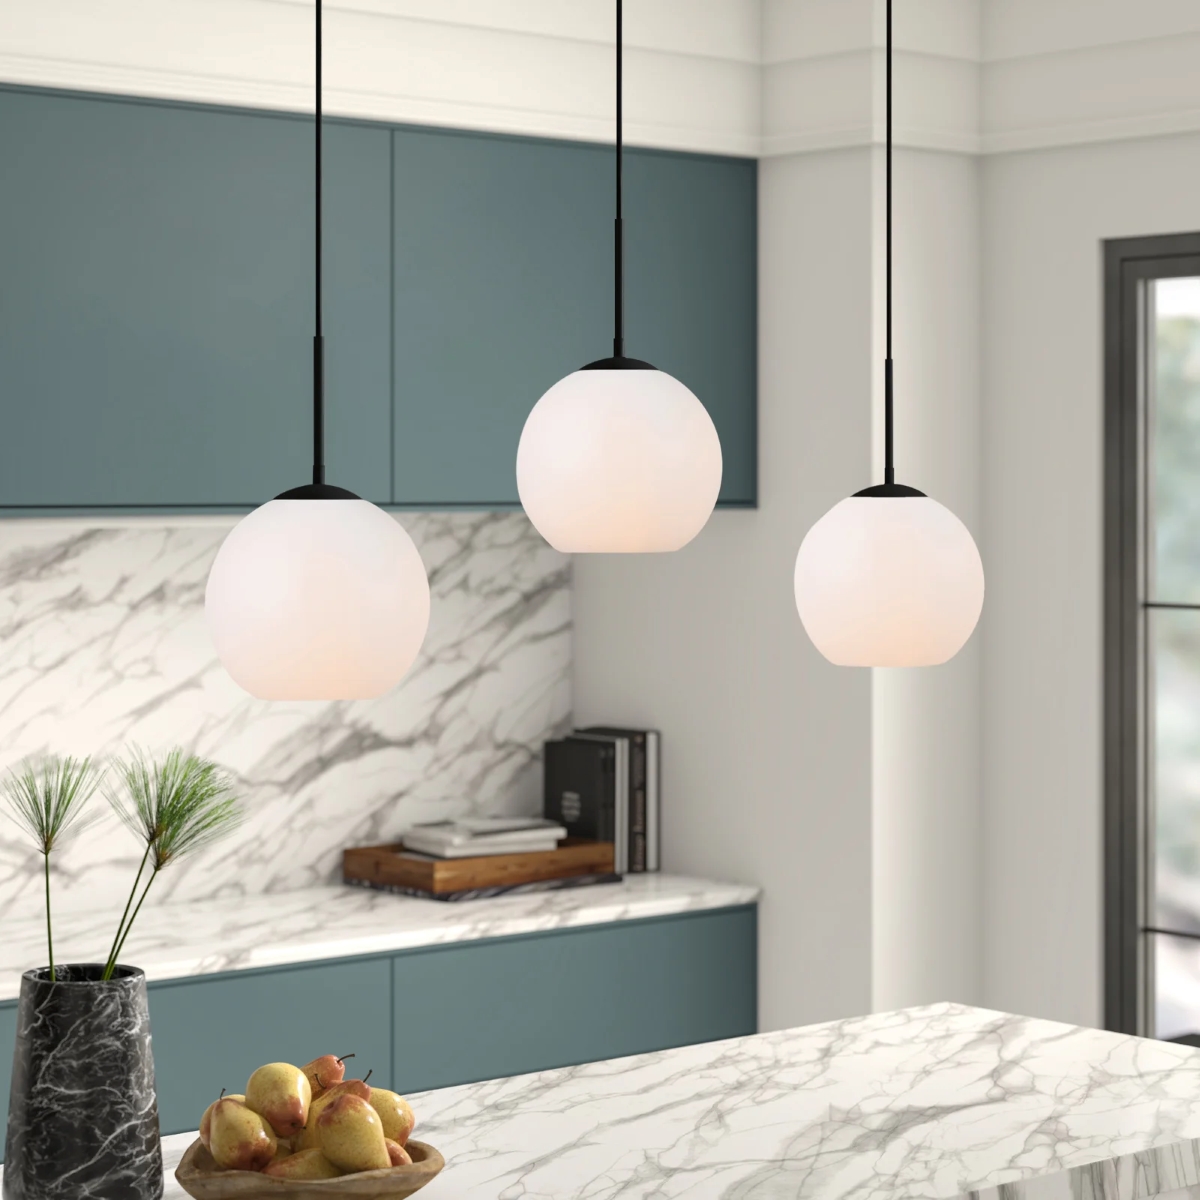 Frosted glass pendant lights in kitchen.